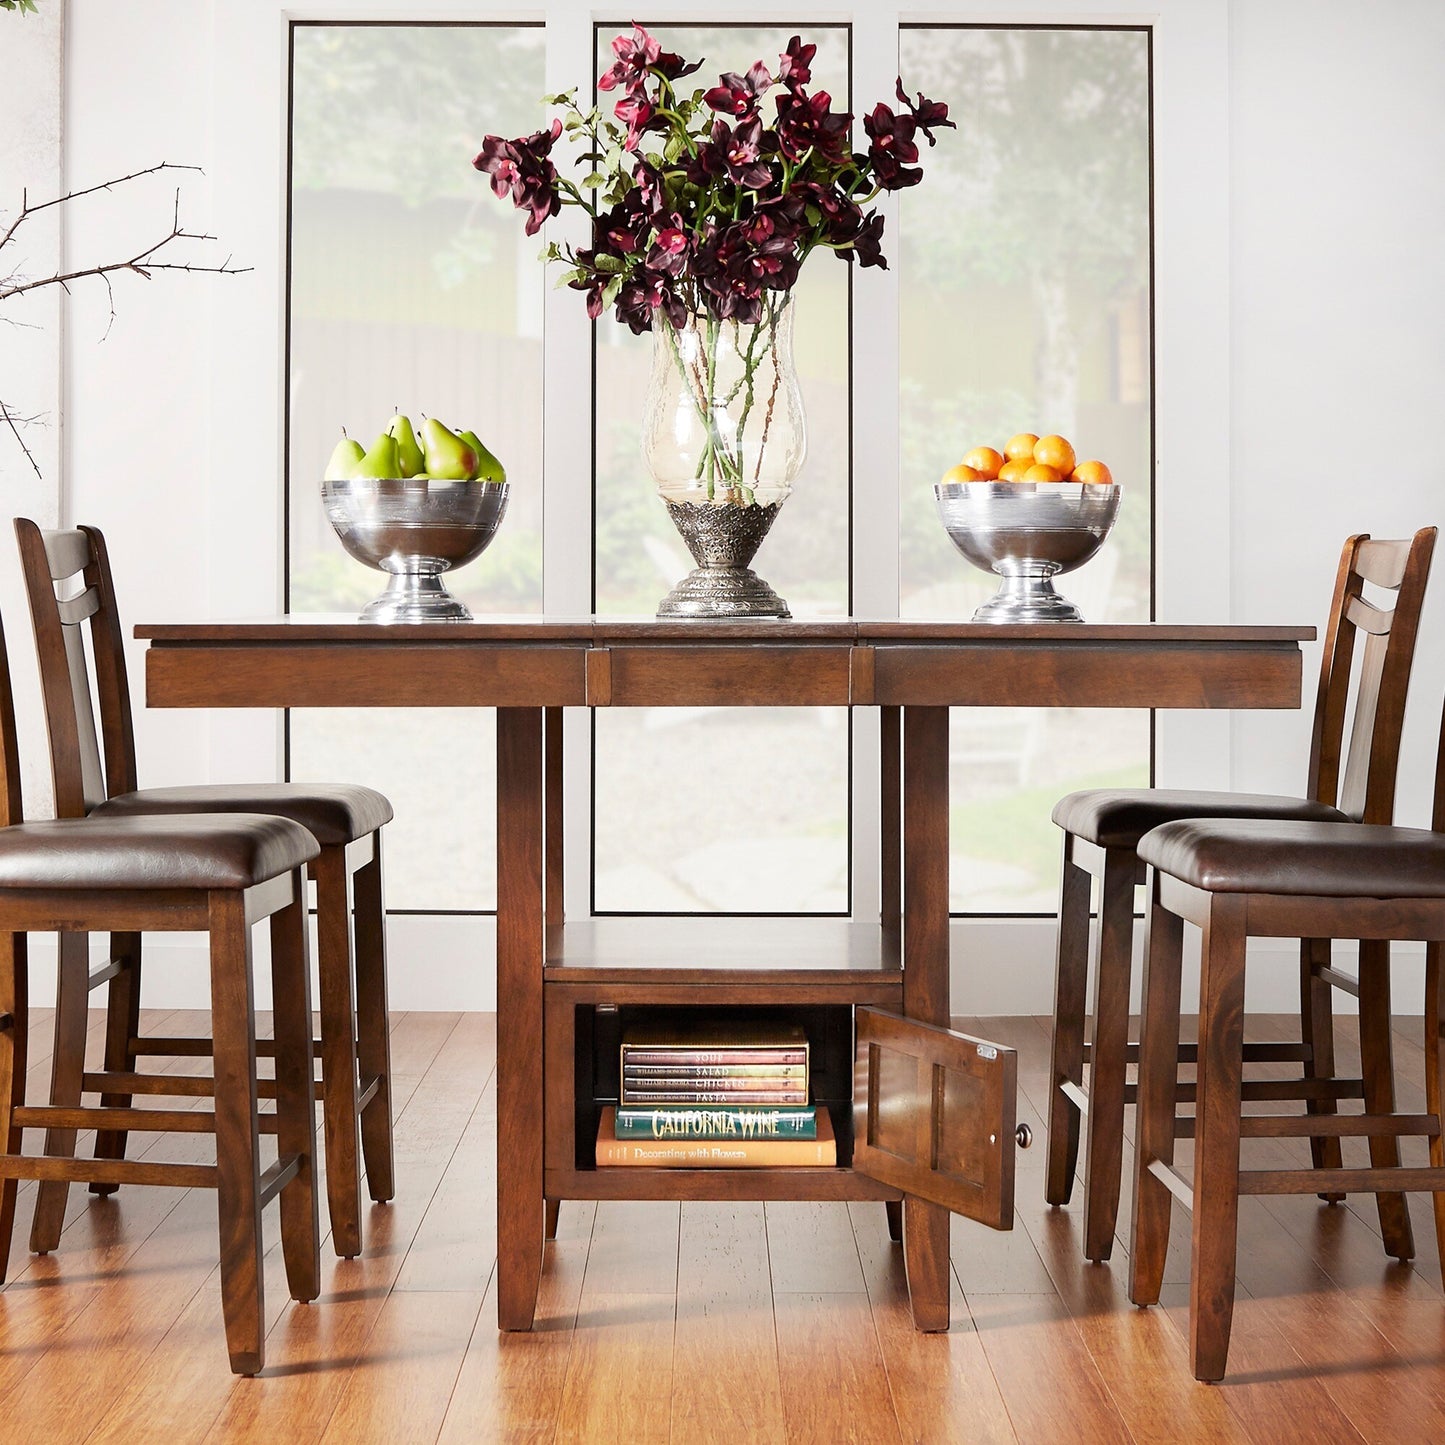 Extending Counter Height Dining Table